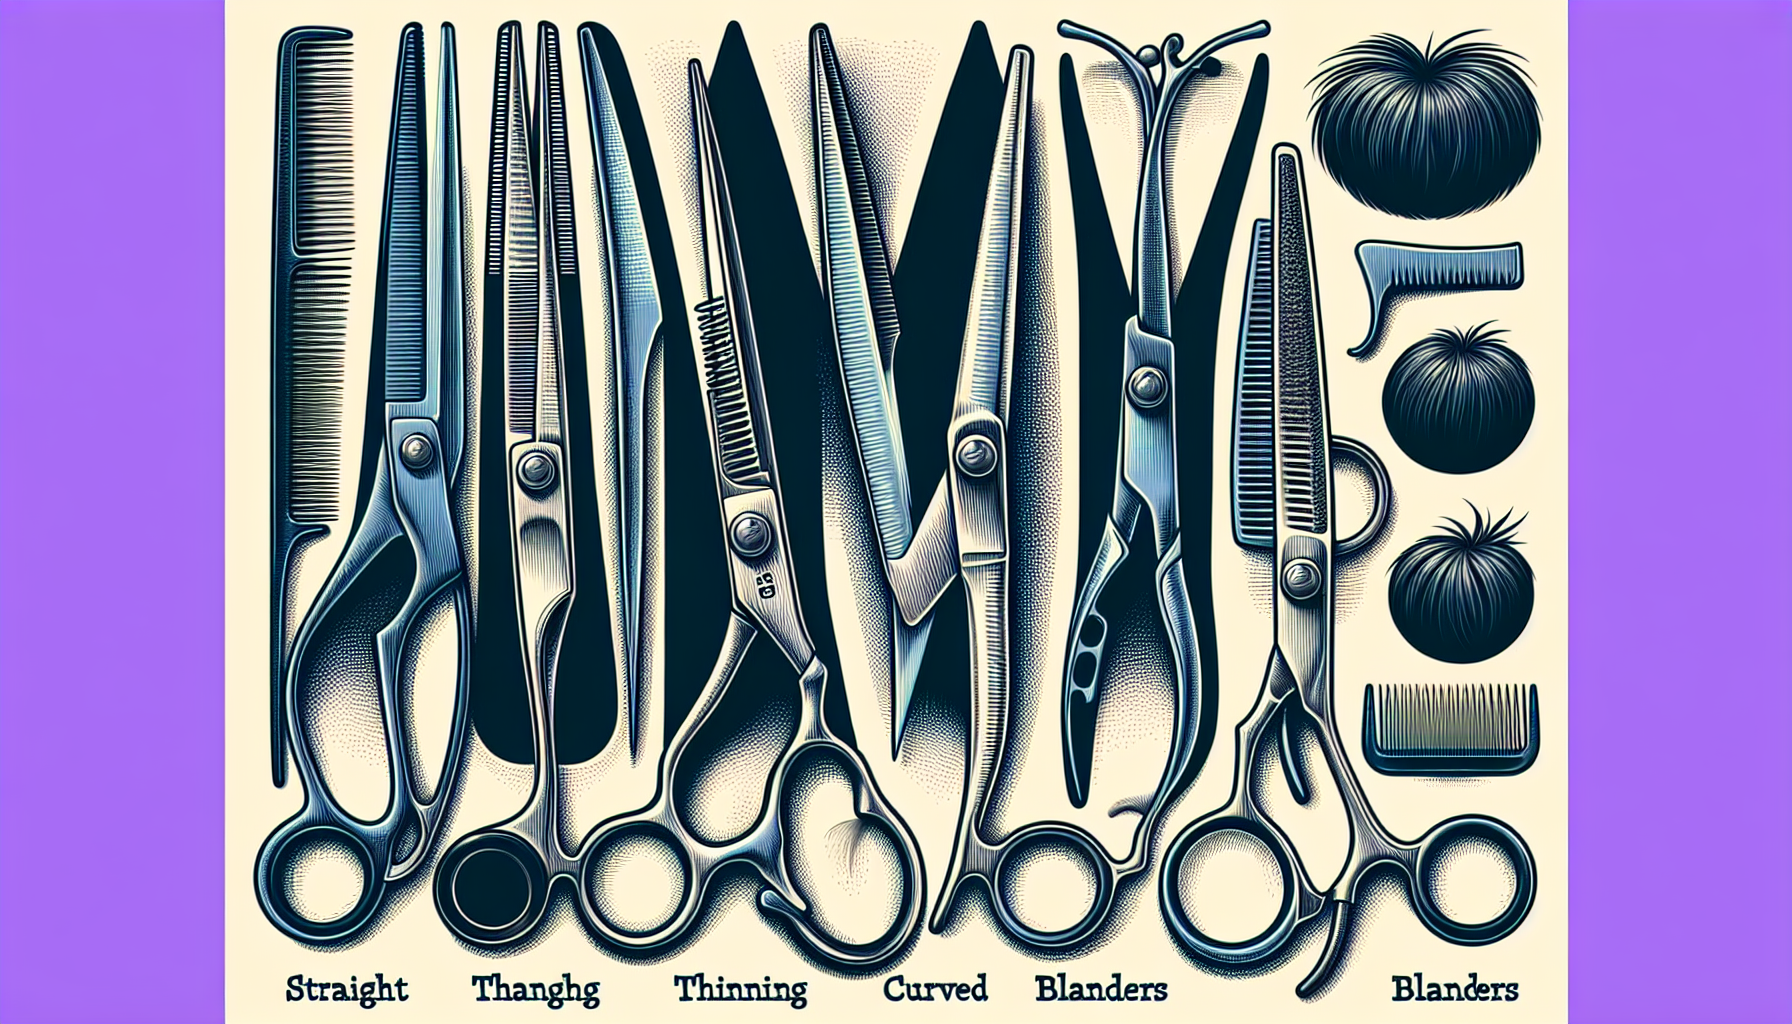 Illustration of different types of dog grooming scissors